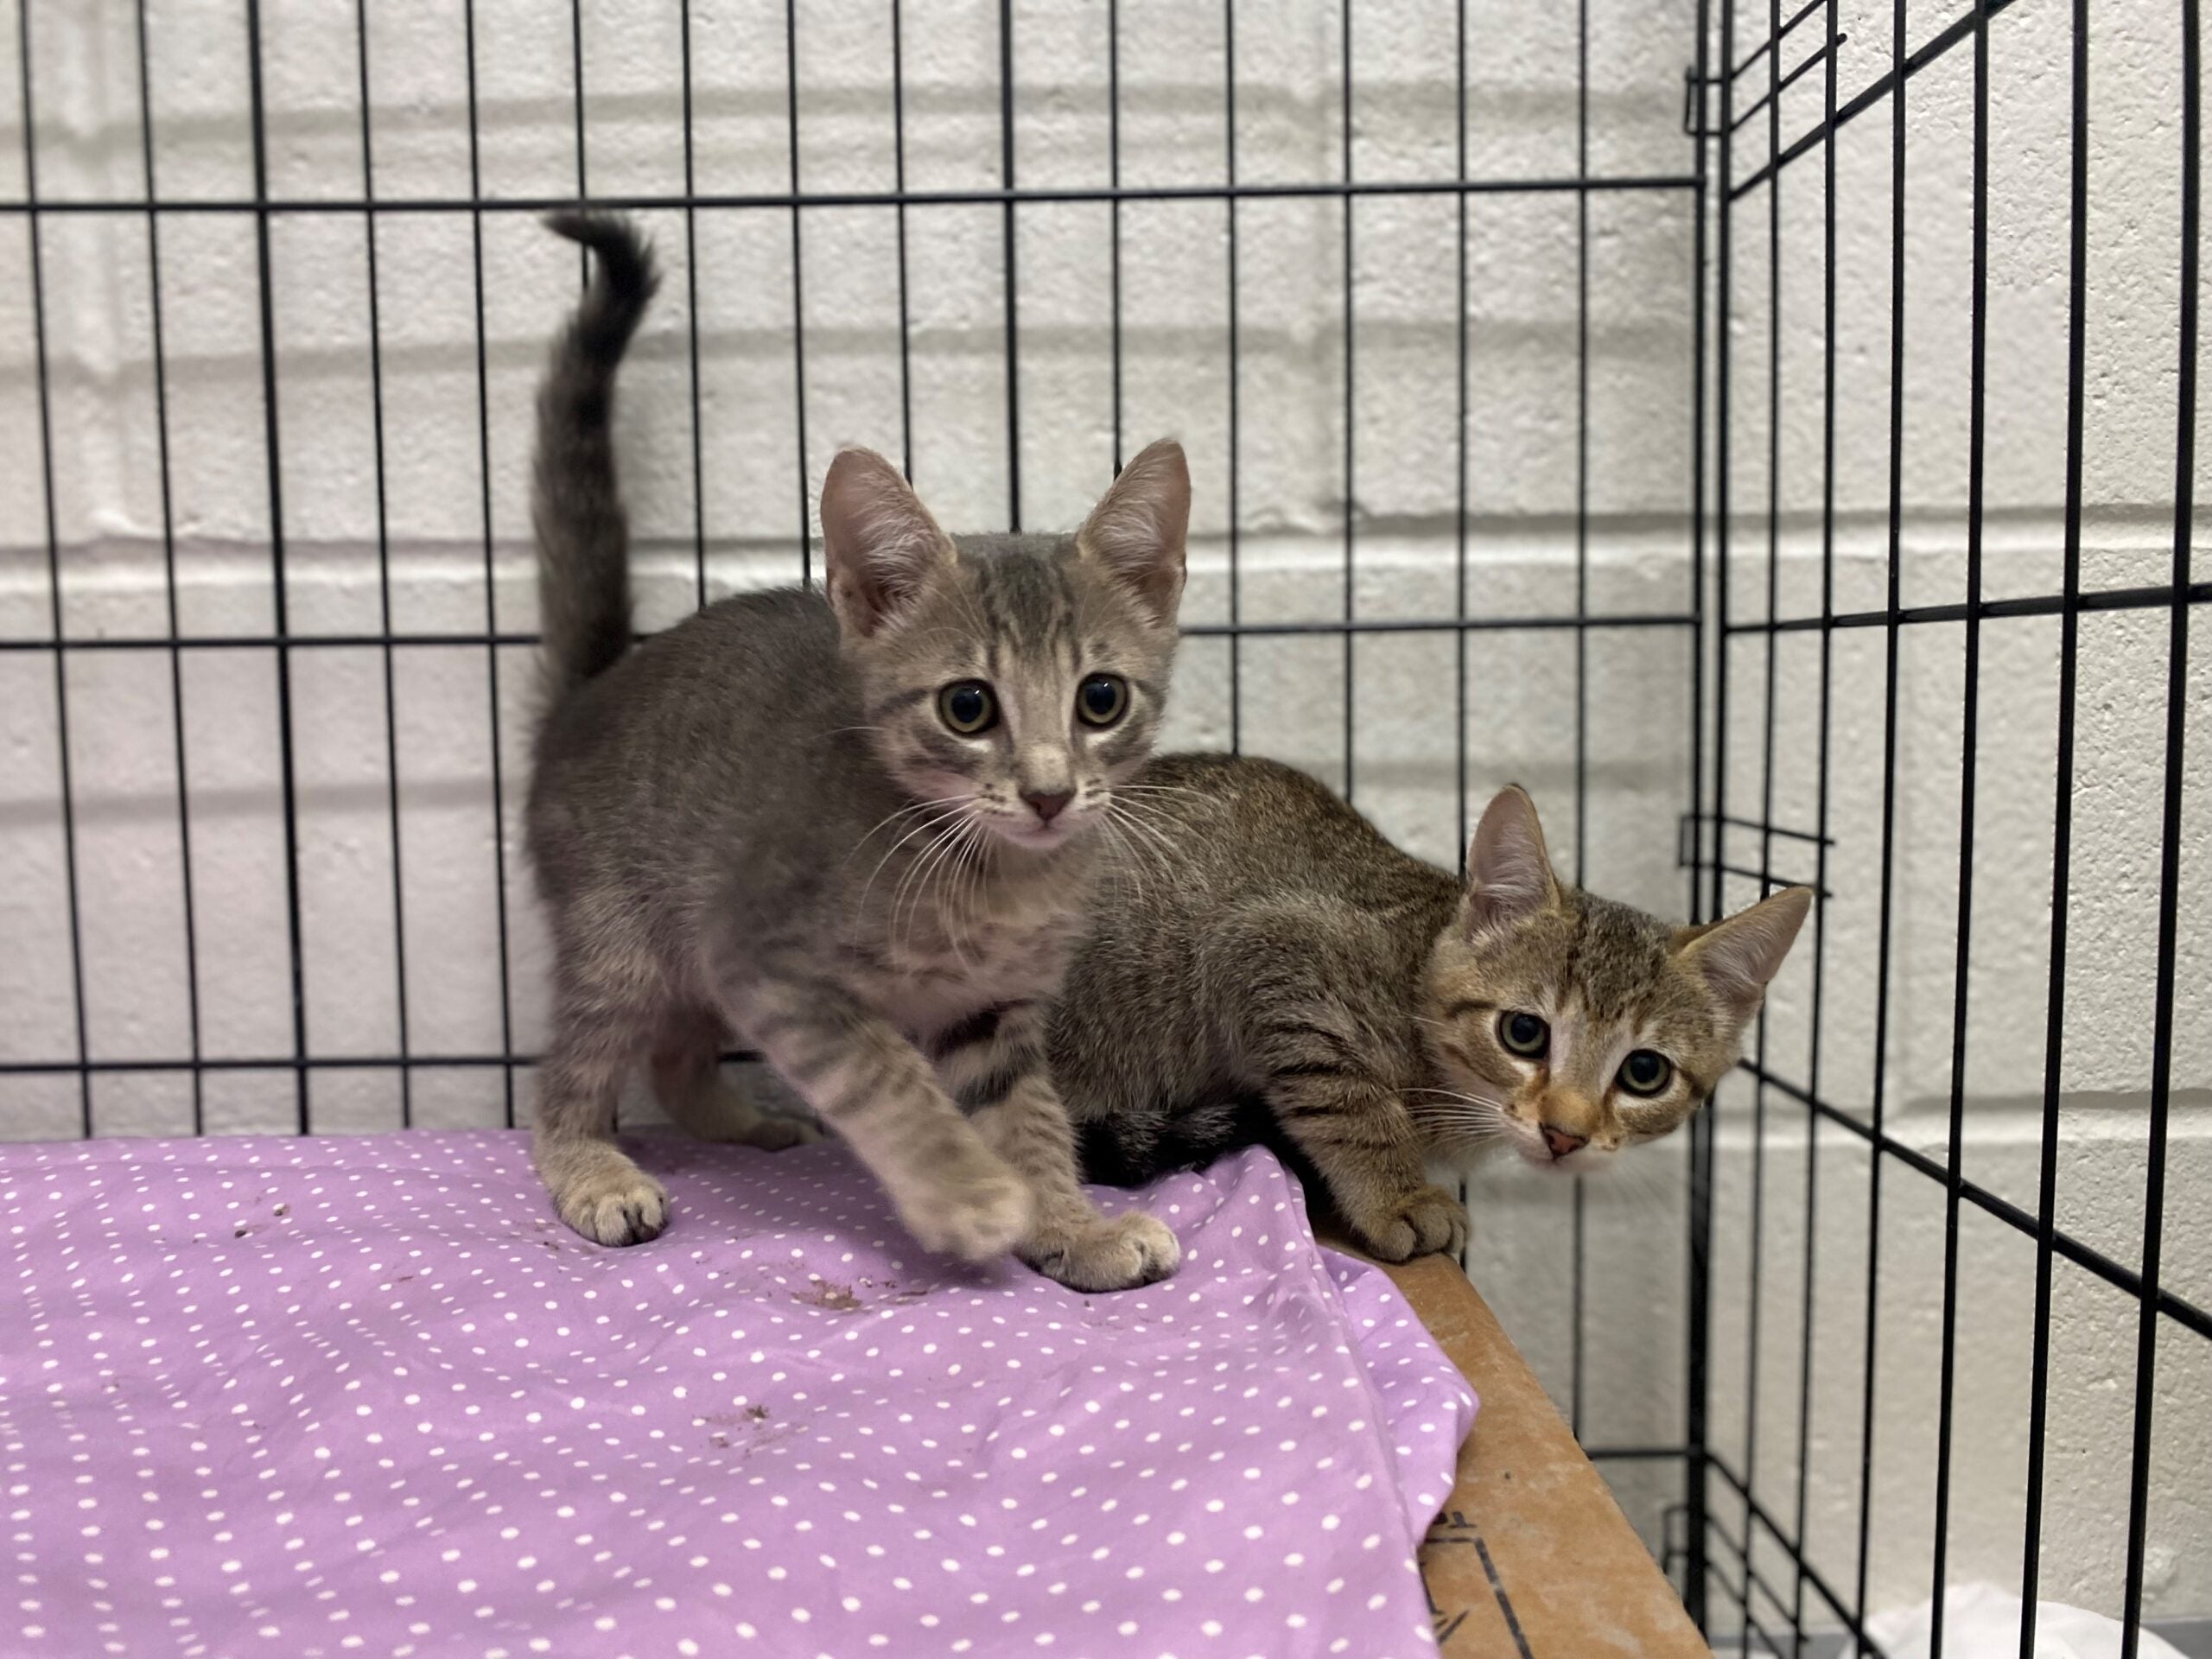 https://bdc2020.o0bc.com/wp-content/uploads/2022/10/Bo-and-Daisy-are-10-week-old-kittens-in-Boston-credit-MSPCA-Angell-63384cf645cd3-scaled.jpg